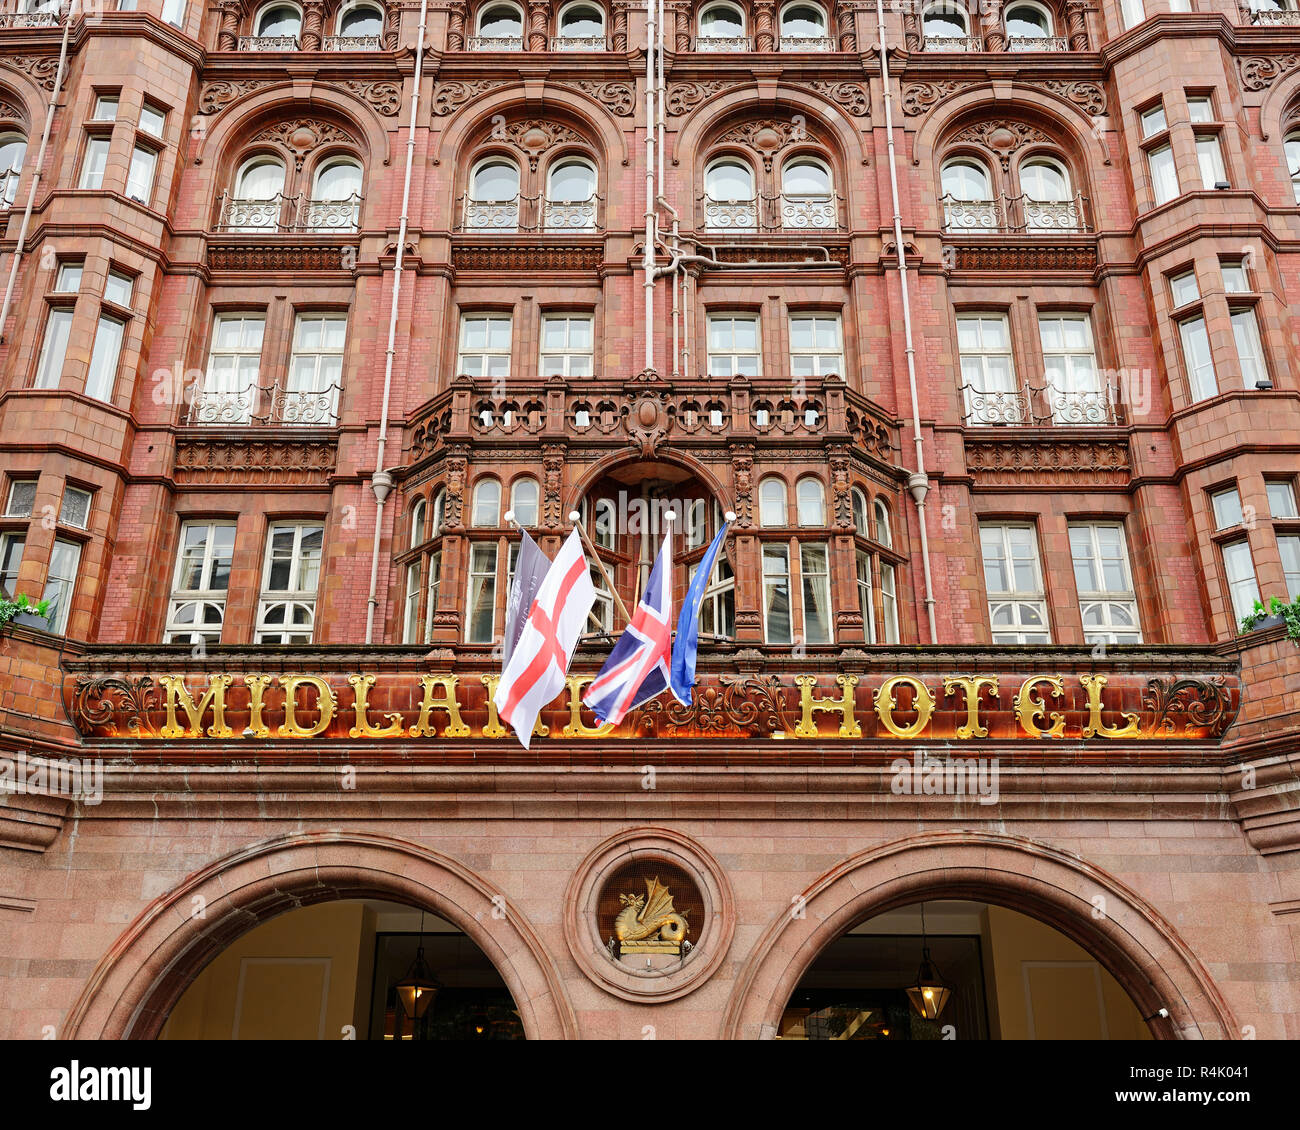 Le Midland Hotel, Manchester, Angleterre, Royaume-Uni Banque D'Images